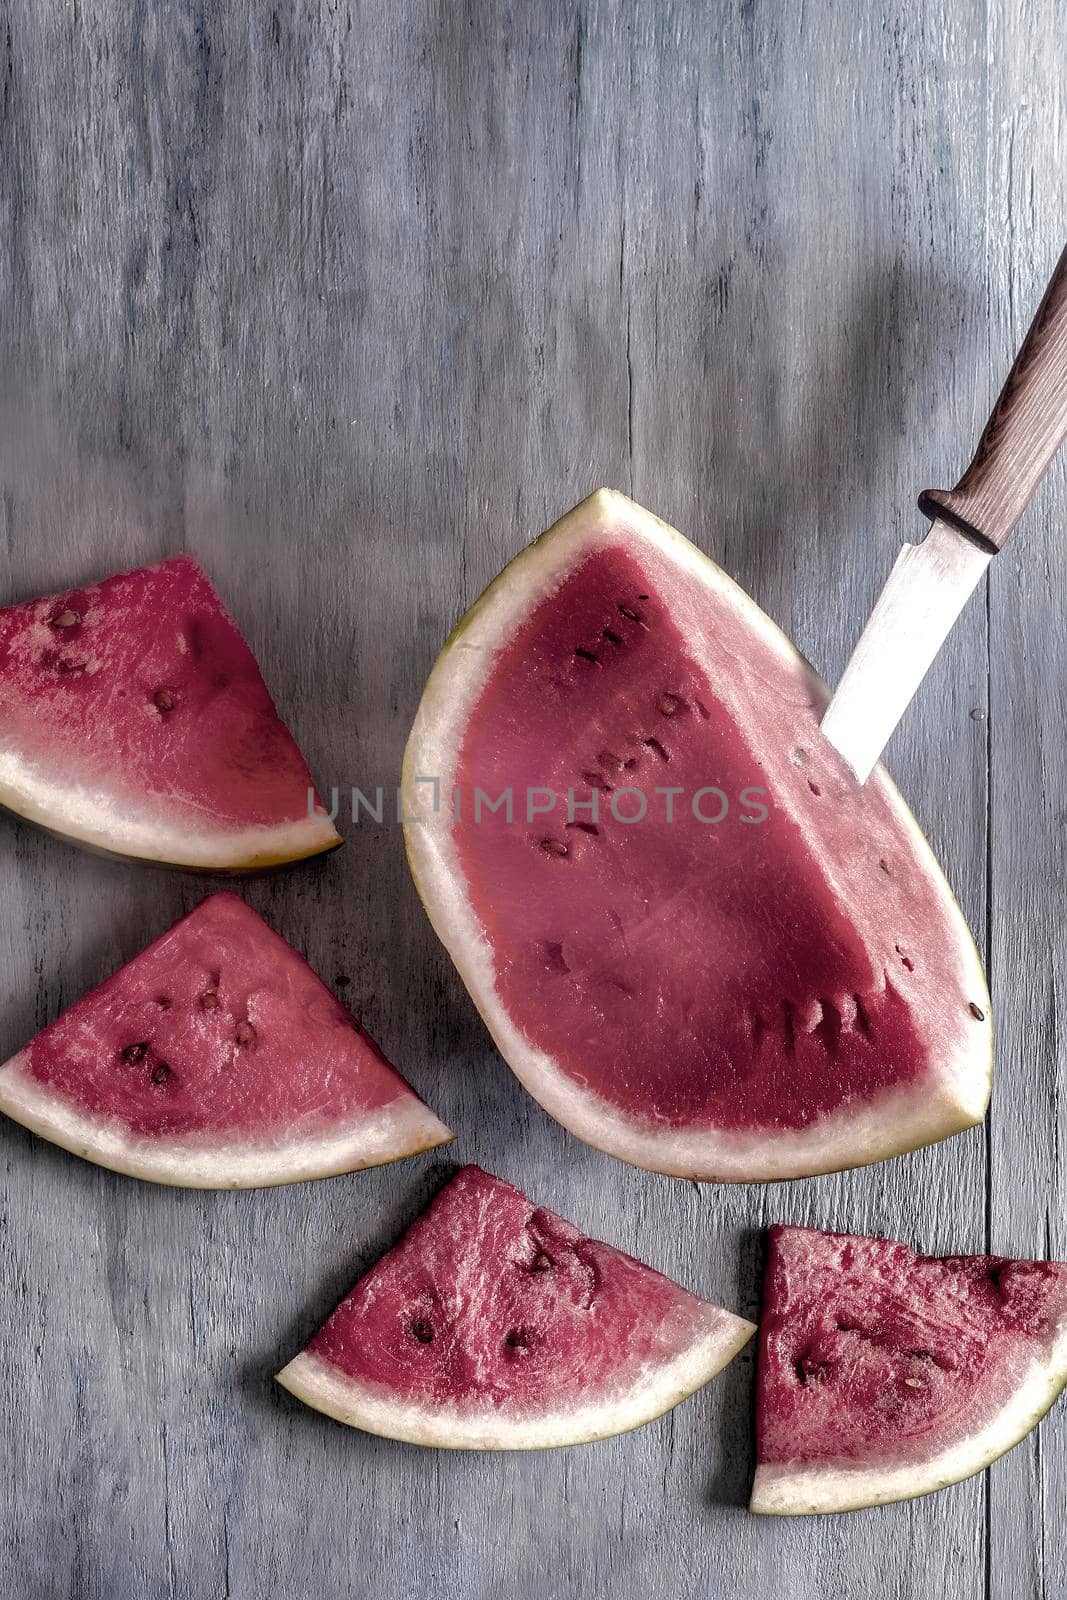 Watermelon cut into slices on a wooden table by georgina198